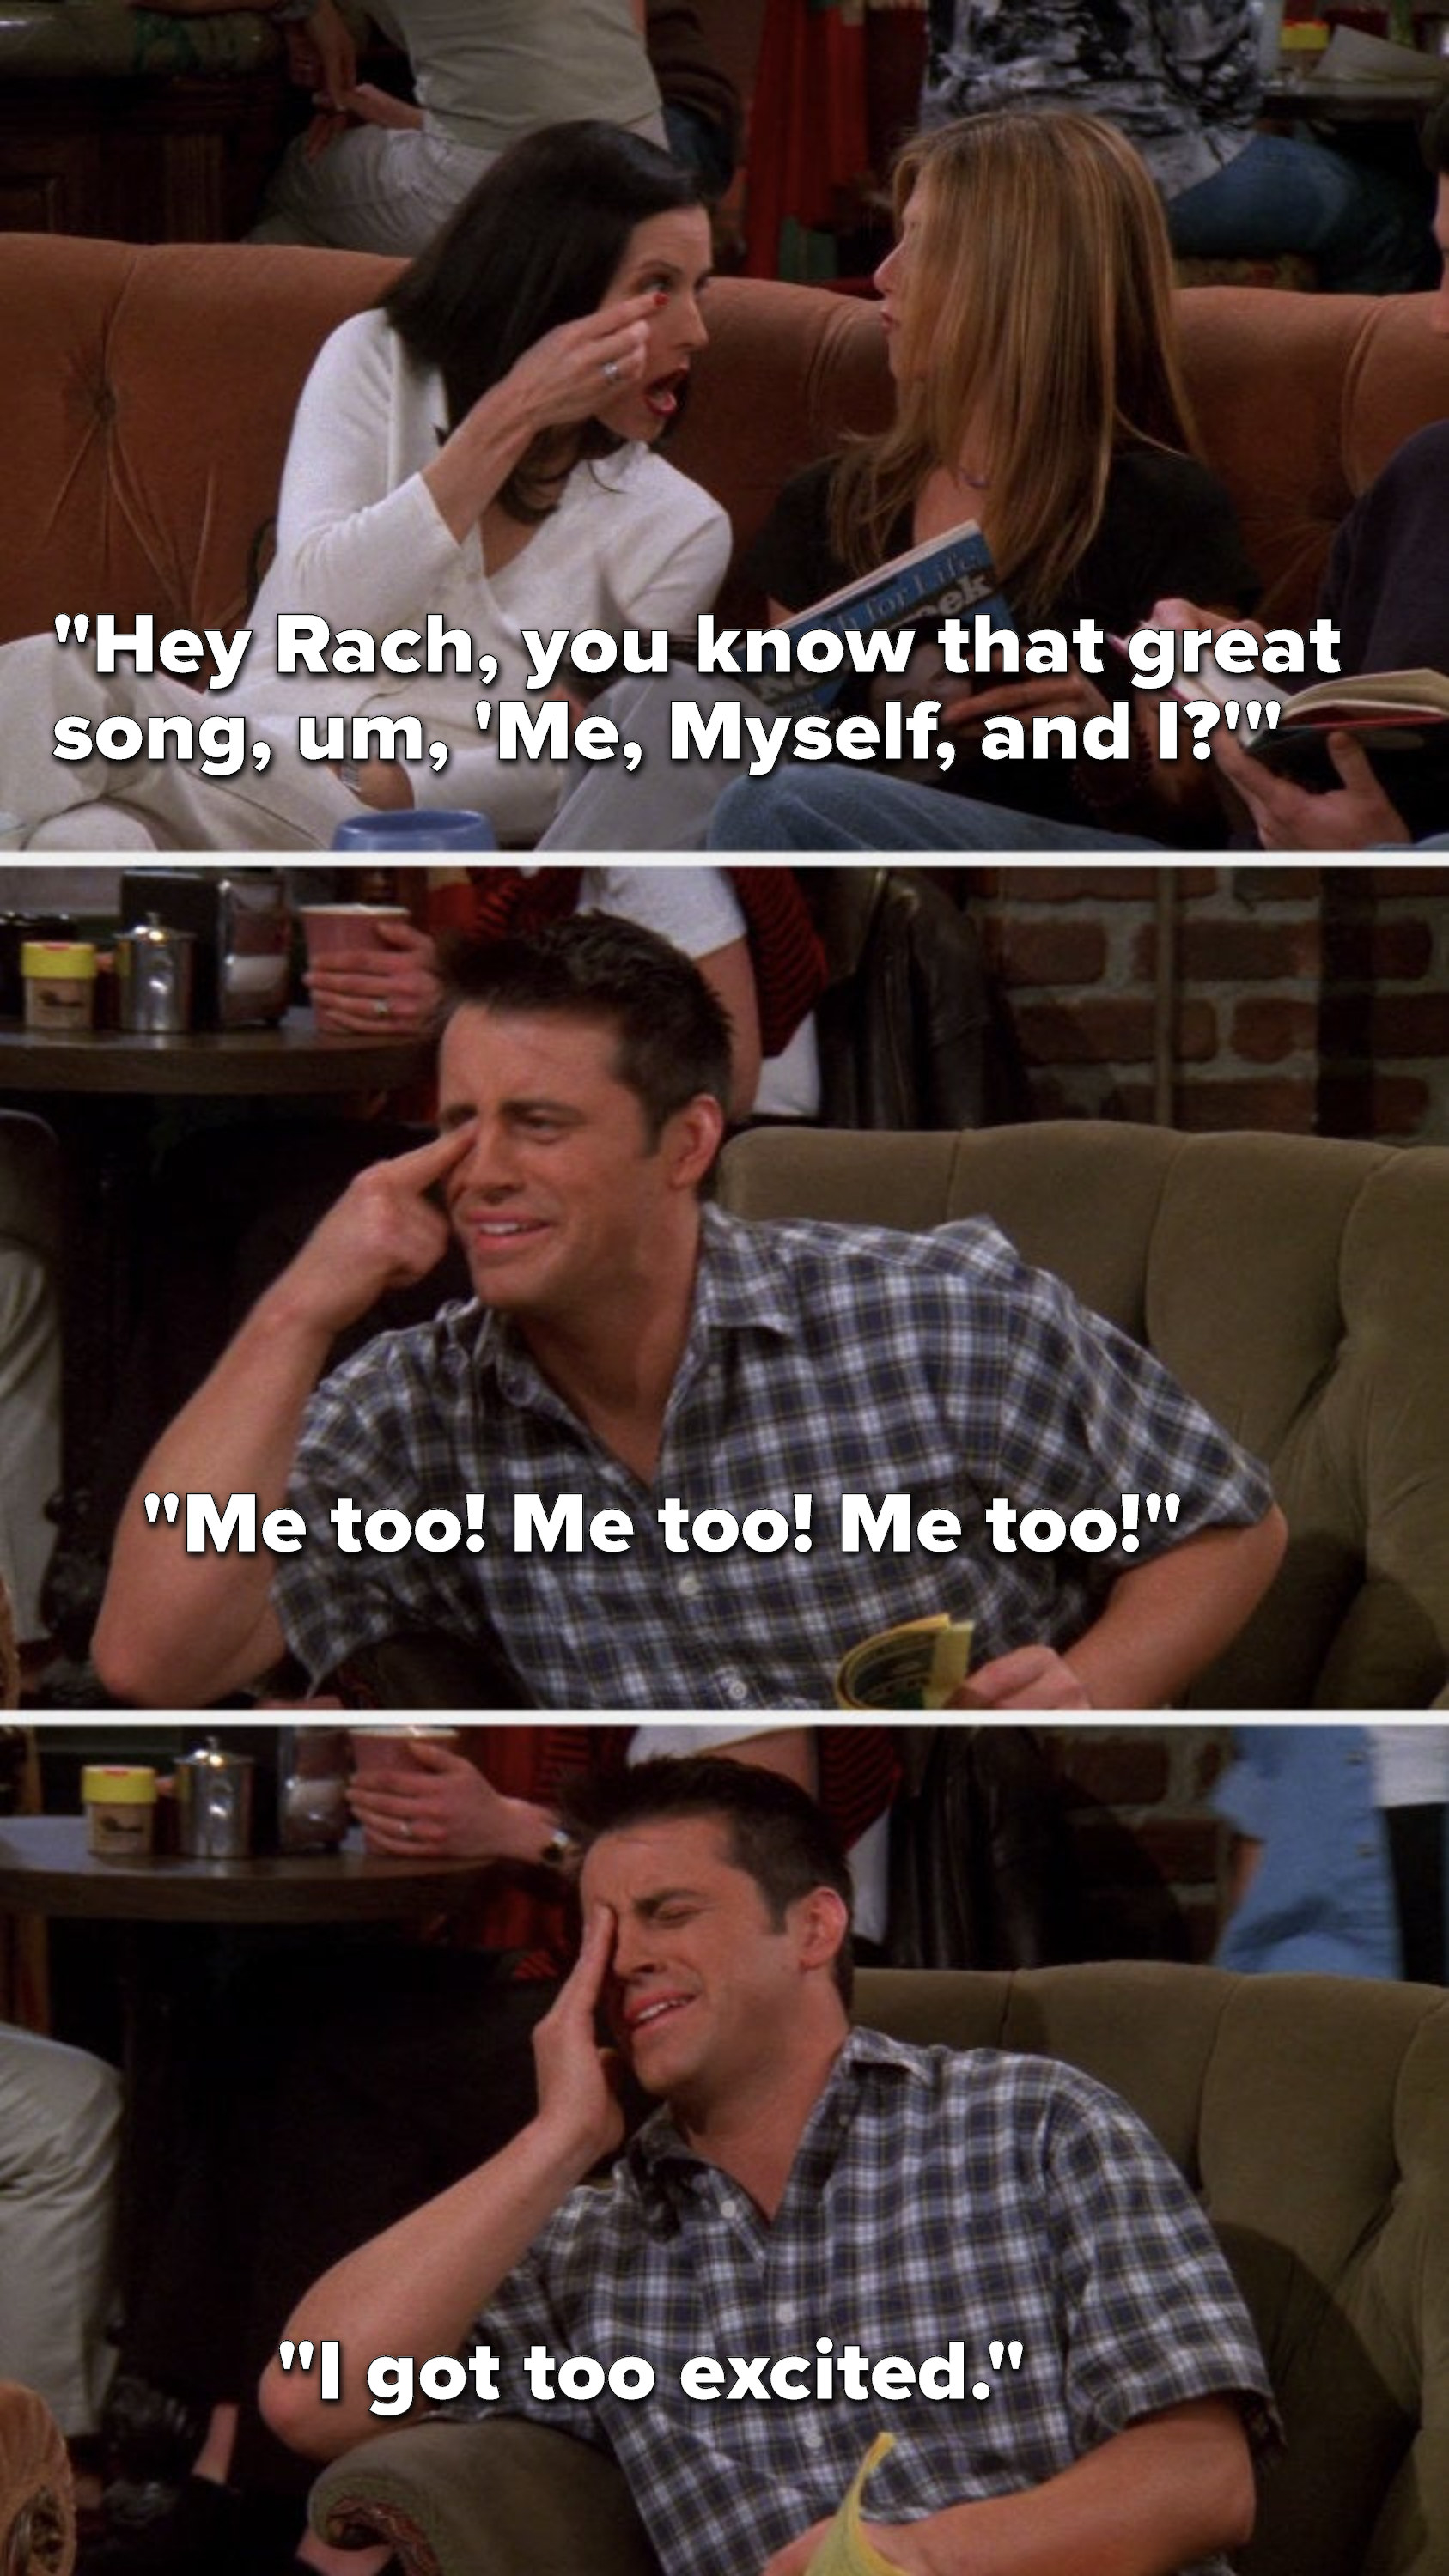 Monica says, &quot;Hey Rach, you know that great song, um, &#x27;Me, Myself, and I&quot; and touches her eye, Joey says &quot;Me too, me too, me too&quot; and touches his eye, then in pain he says, &quot;I got too excited&quot;